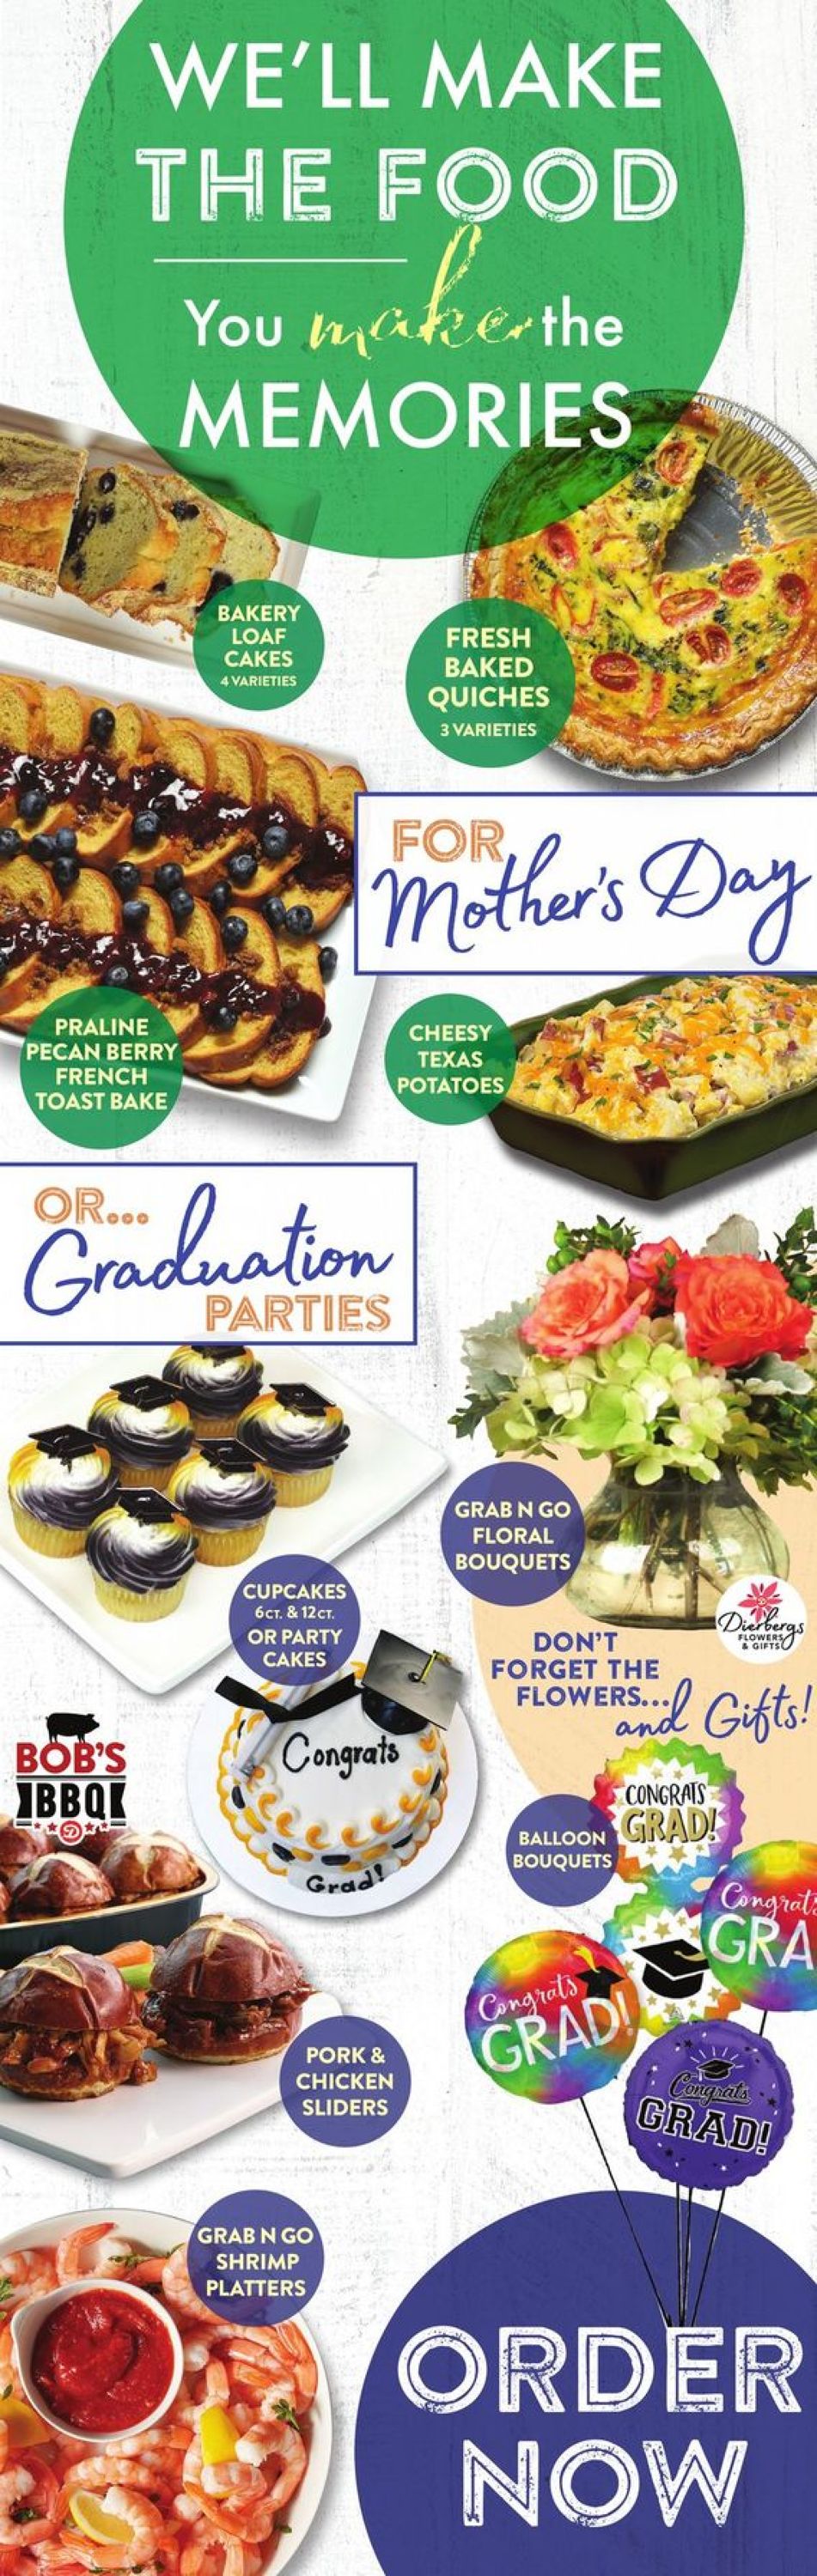 Catalogue Dierbergs from 04/27/2021